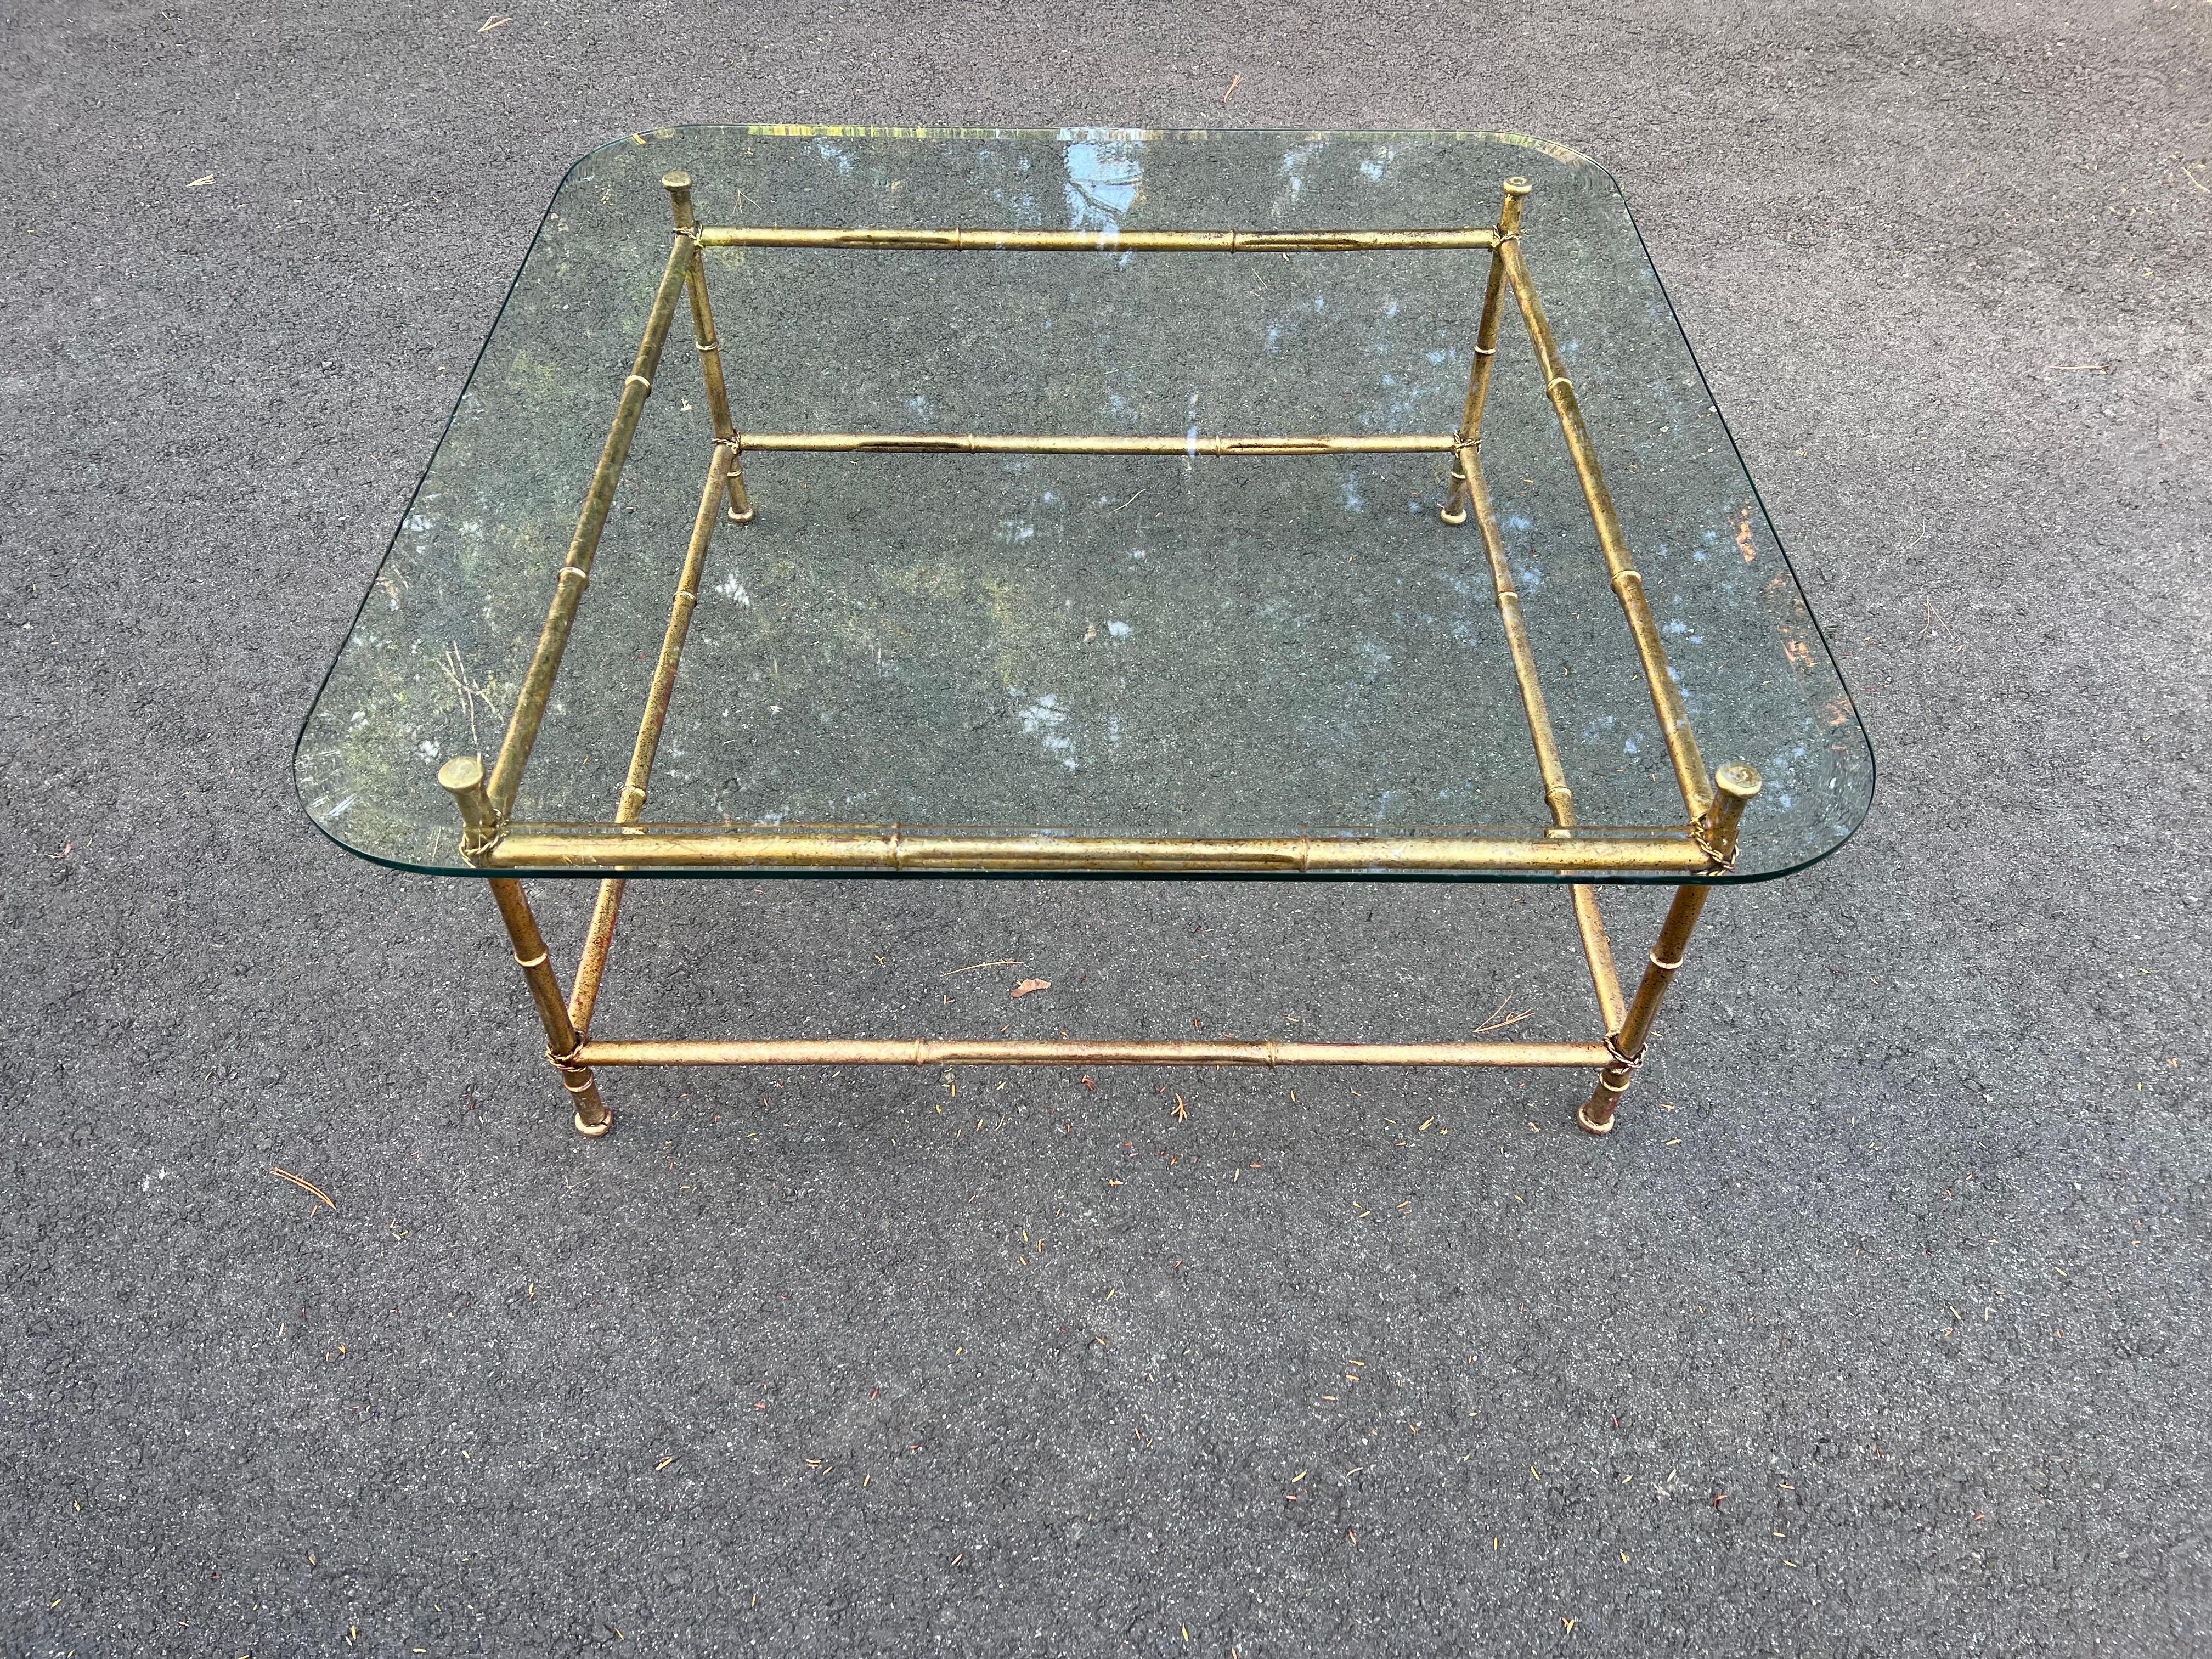 Faux Bamboo Gilt Metal Coffee Table with Glass Top. Nice bevelled glass top with wide rounded square glass design. Rope tassle details around each corner. Classic design and timeless elegance make up this piece.